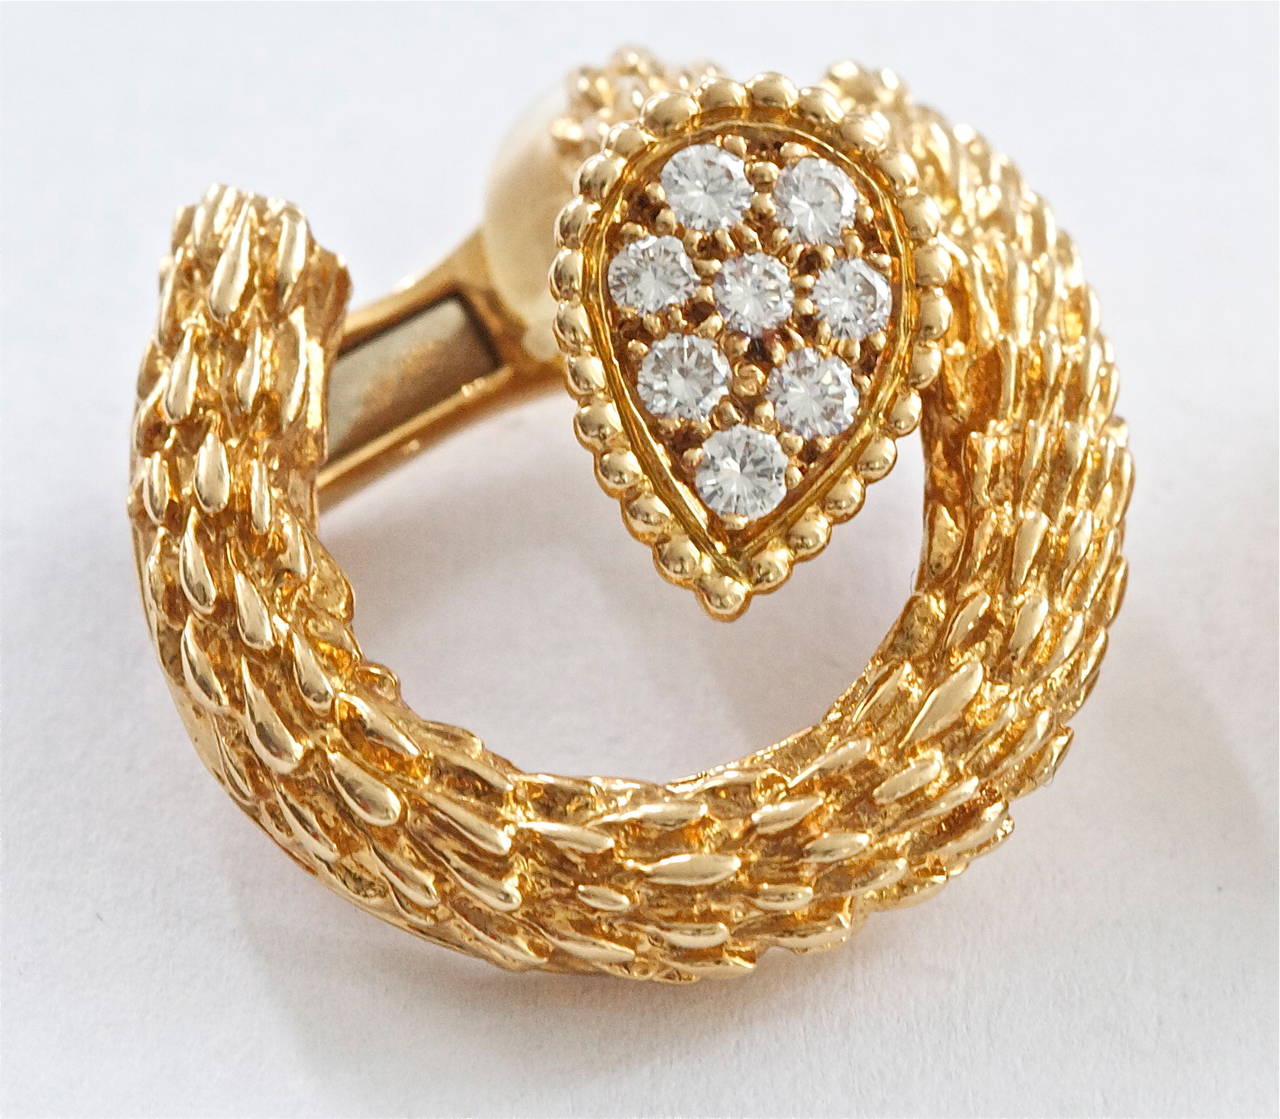 The highly desirable yellow gold snake collection from the French jewelry house of Boucheron. The designer has textured the gold to replicate the scales of a snake. There are 16 white, clean diamonds weighing approximately 0.48 carats.  In 18k gold.